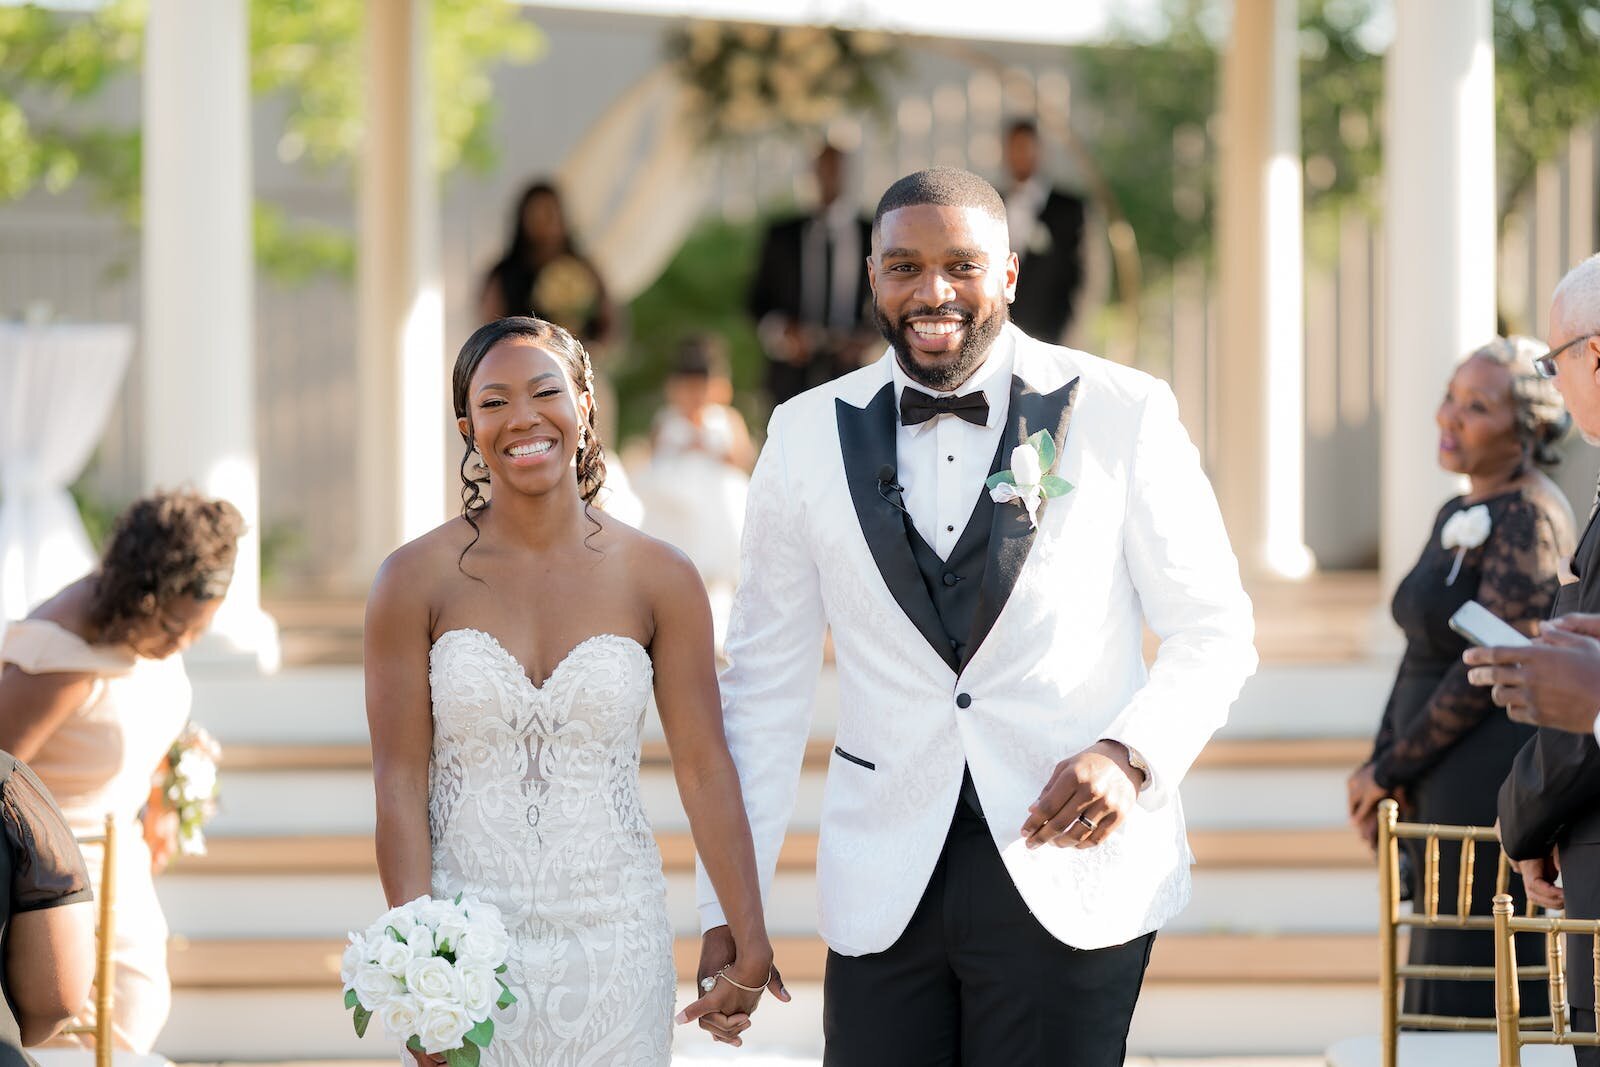 Our Georgia wedding planner curates extraordinary celebrations. With meticulous planning and attention to detail, we create weddings that exceed expectations.